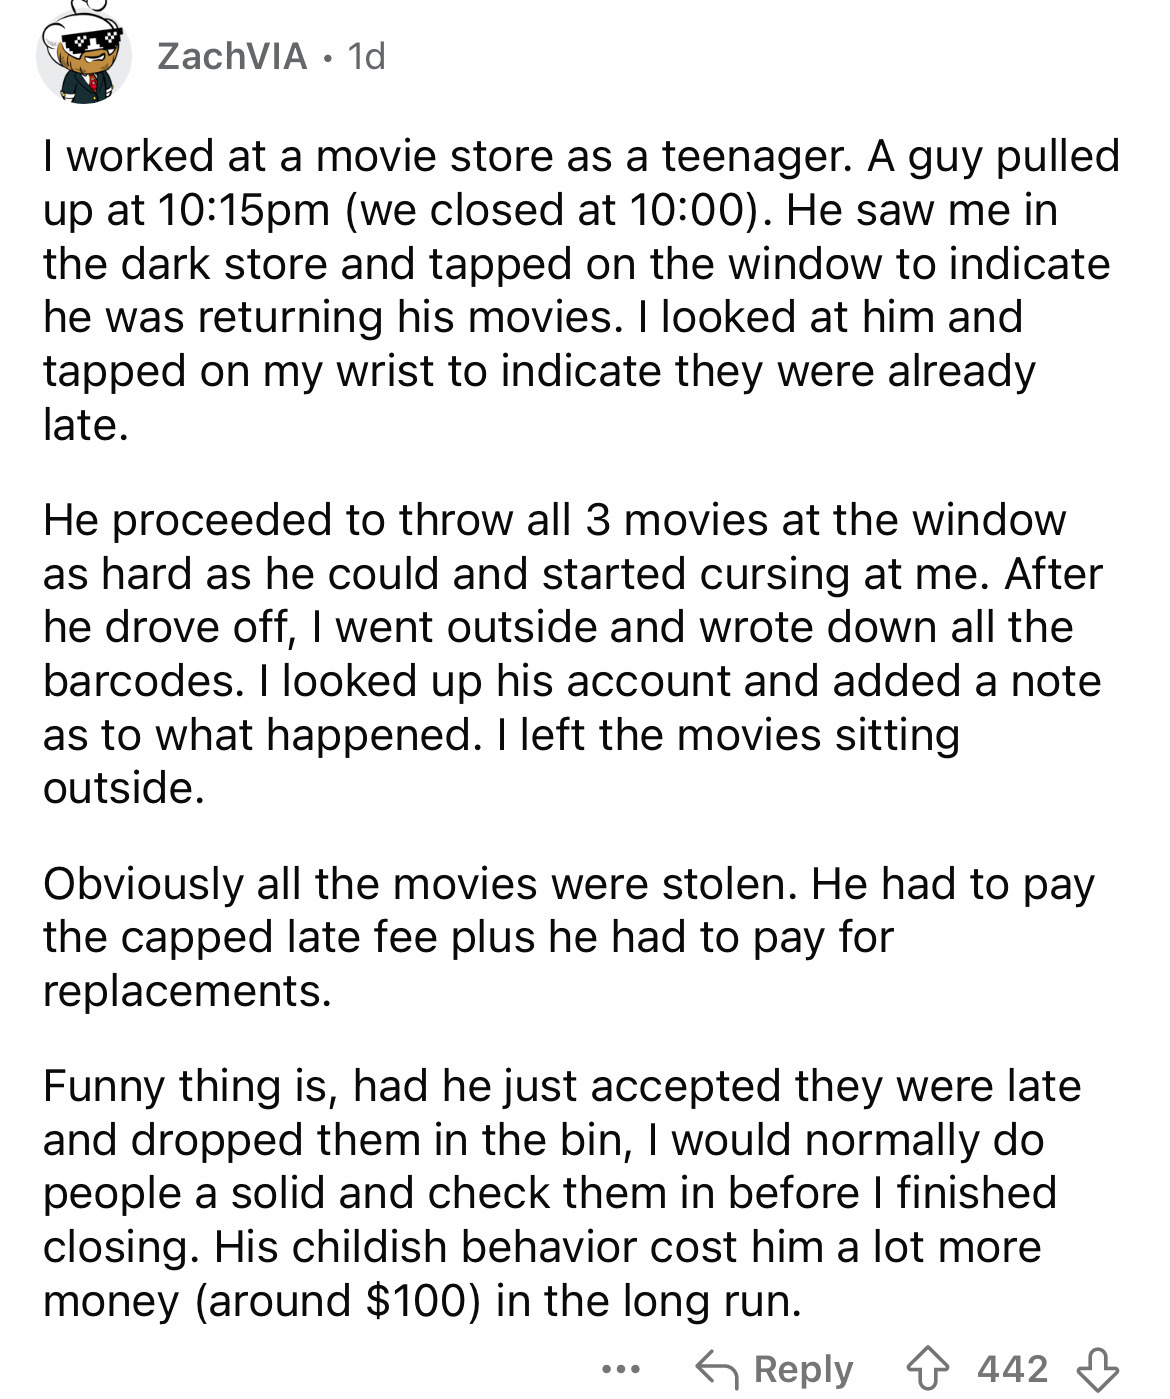 document - ZachVIA 1d I worked at a movie store as a teenager. A guy pulled up at pm we closed at . He saw me in the dark store and tapped on the window to indicate he was returning his movies. I looked at him and tapped on my wrist to indicate they were 